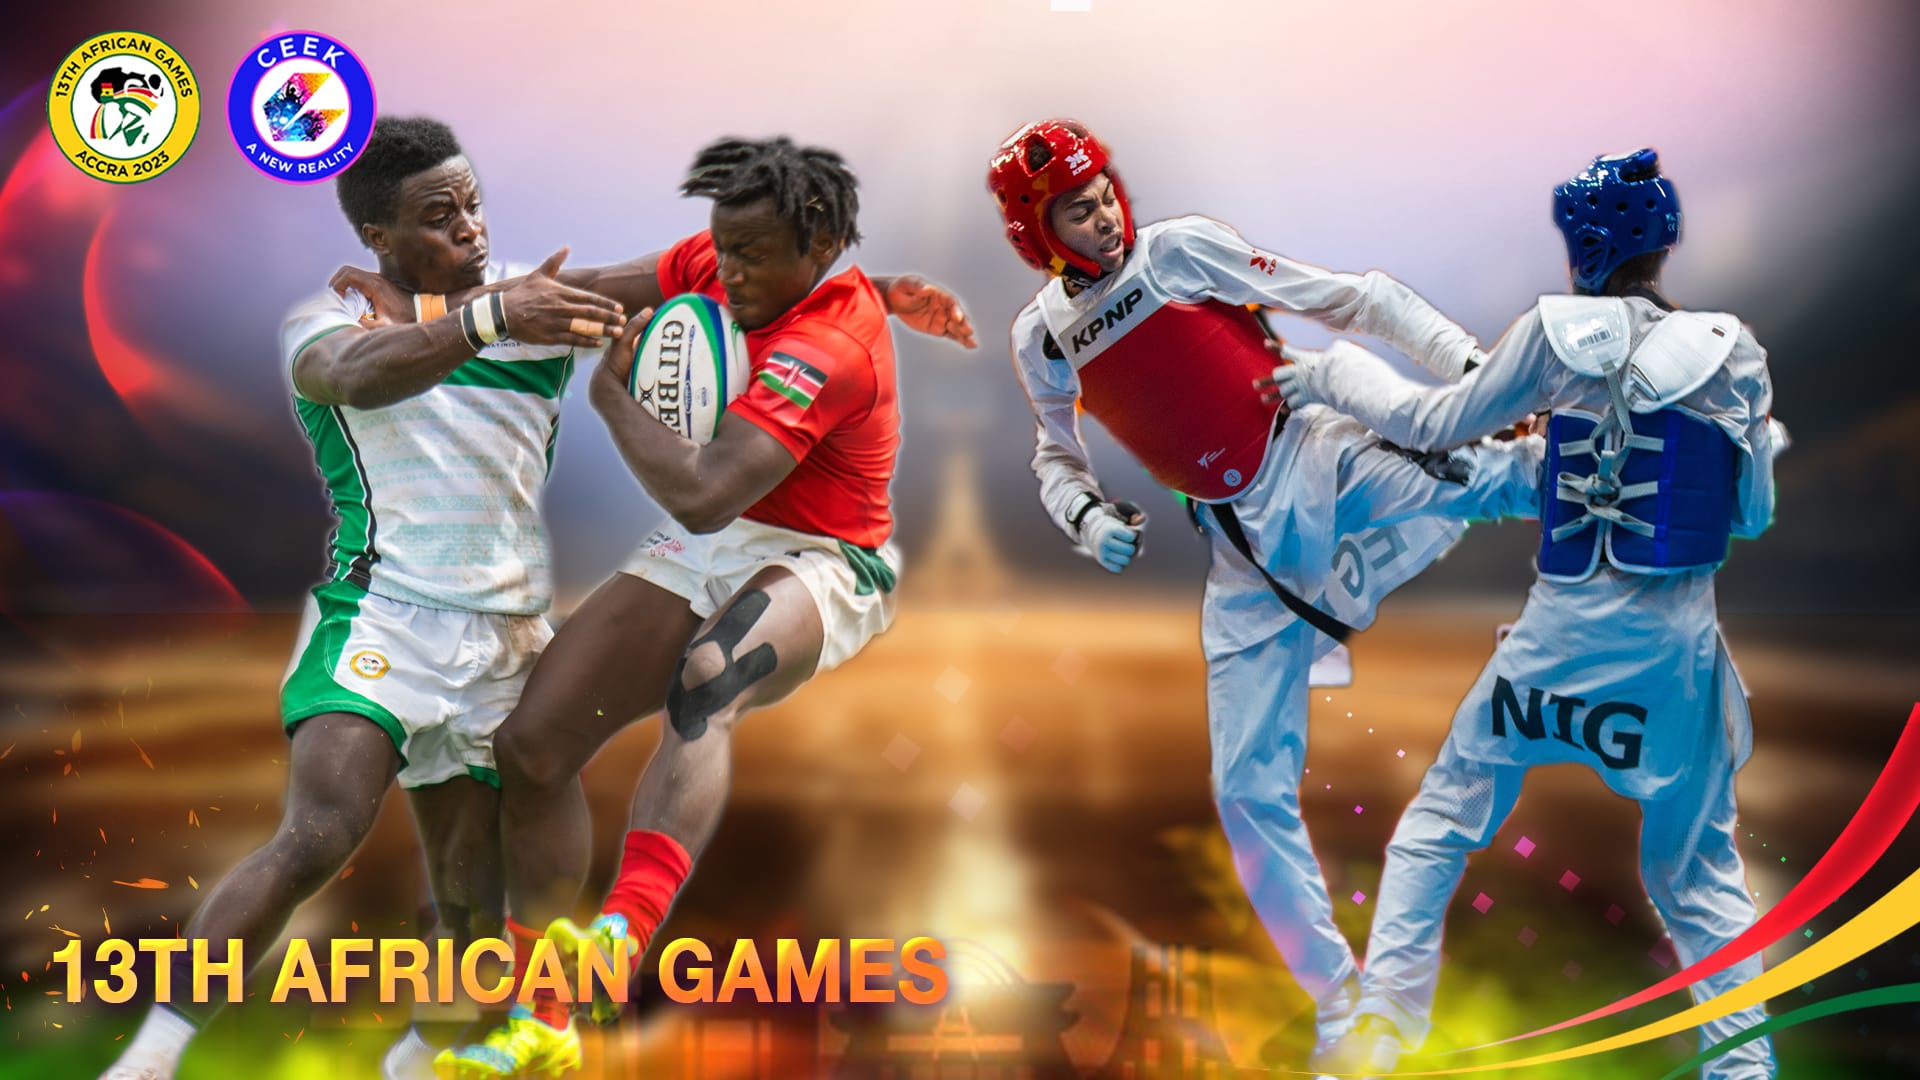  African Games Accra African Games 21st March